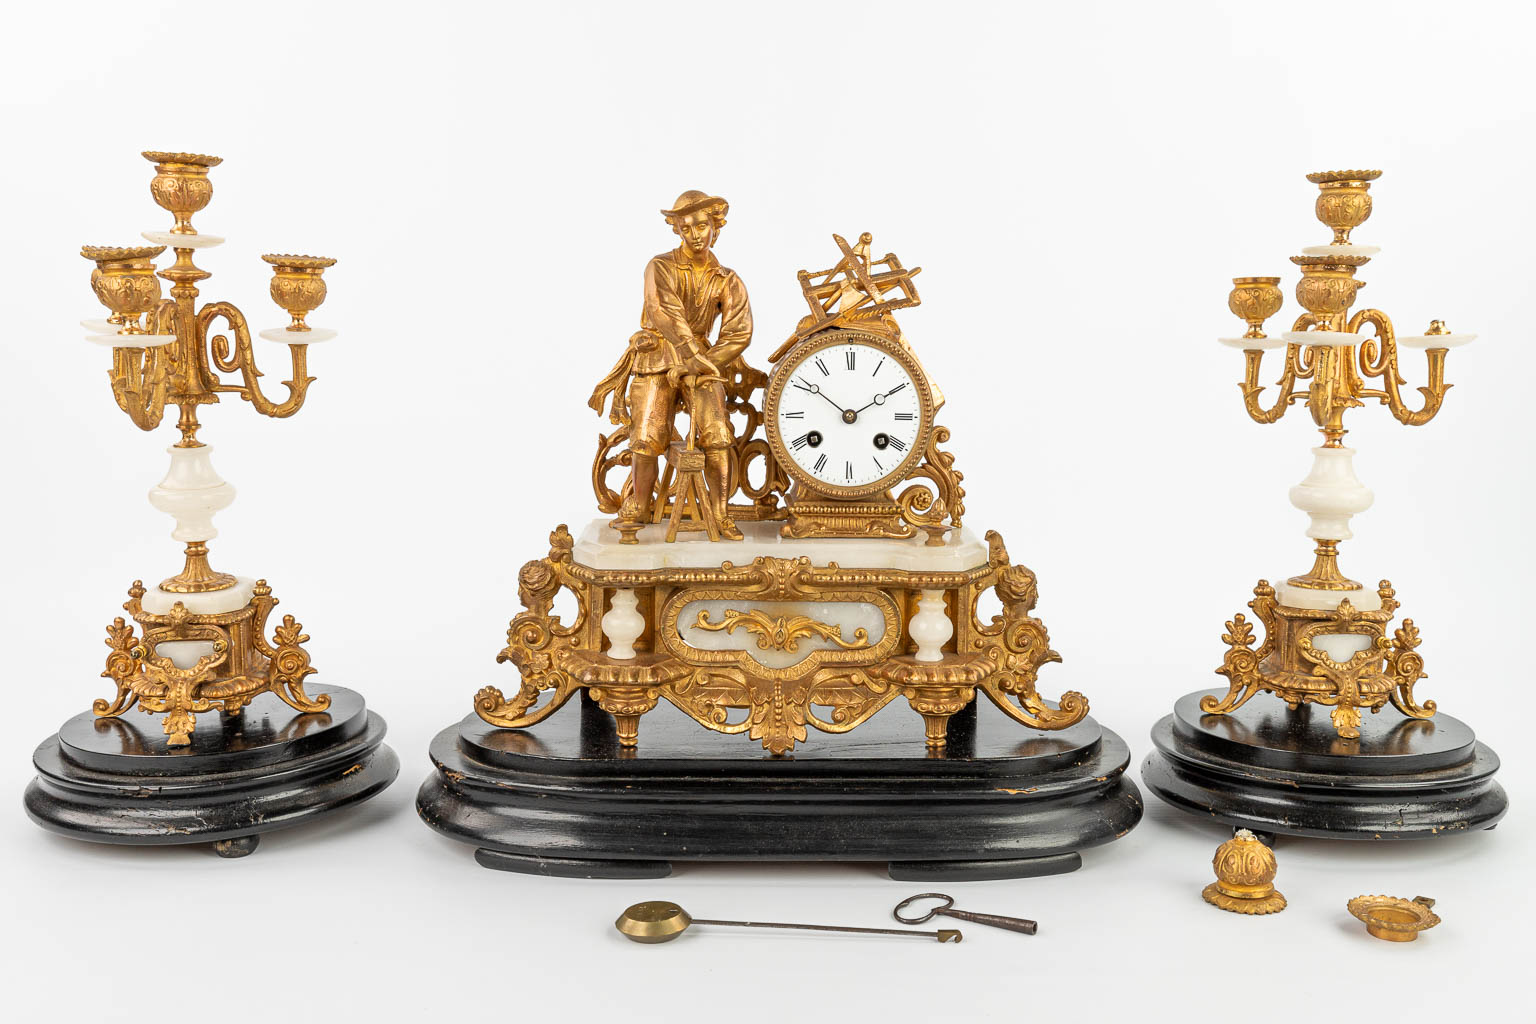 A three-piece mantle clock made of gilt spelter and alabaster, standing under three globes. (H:31cm)